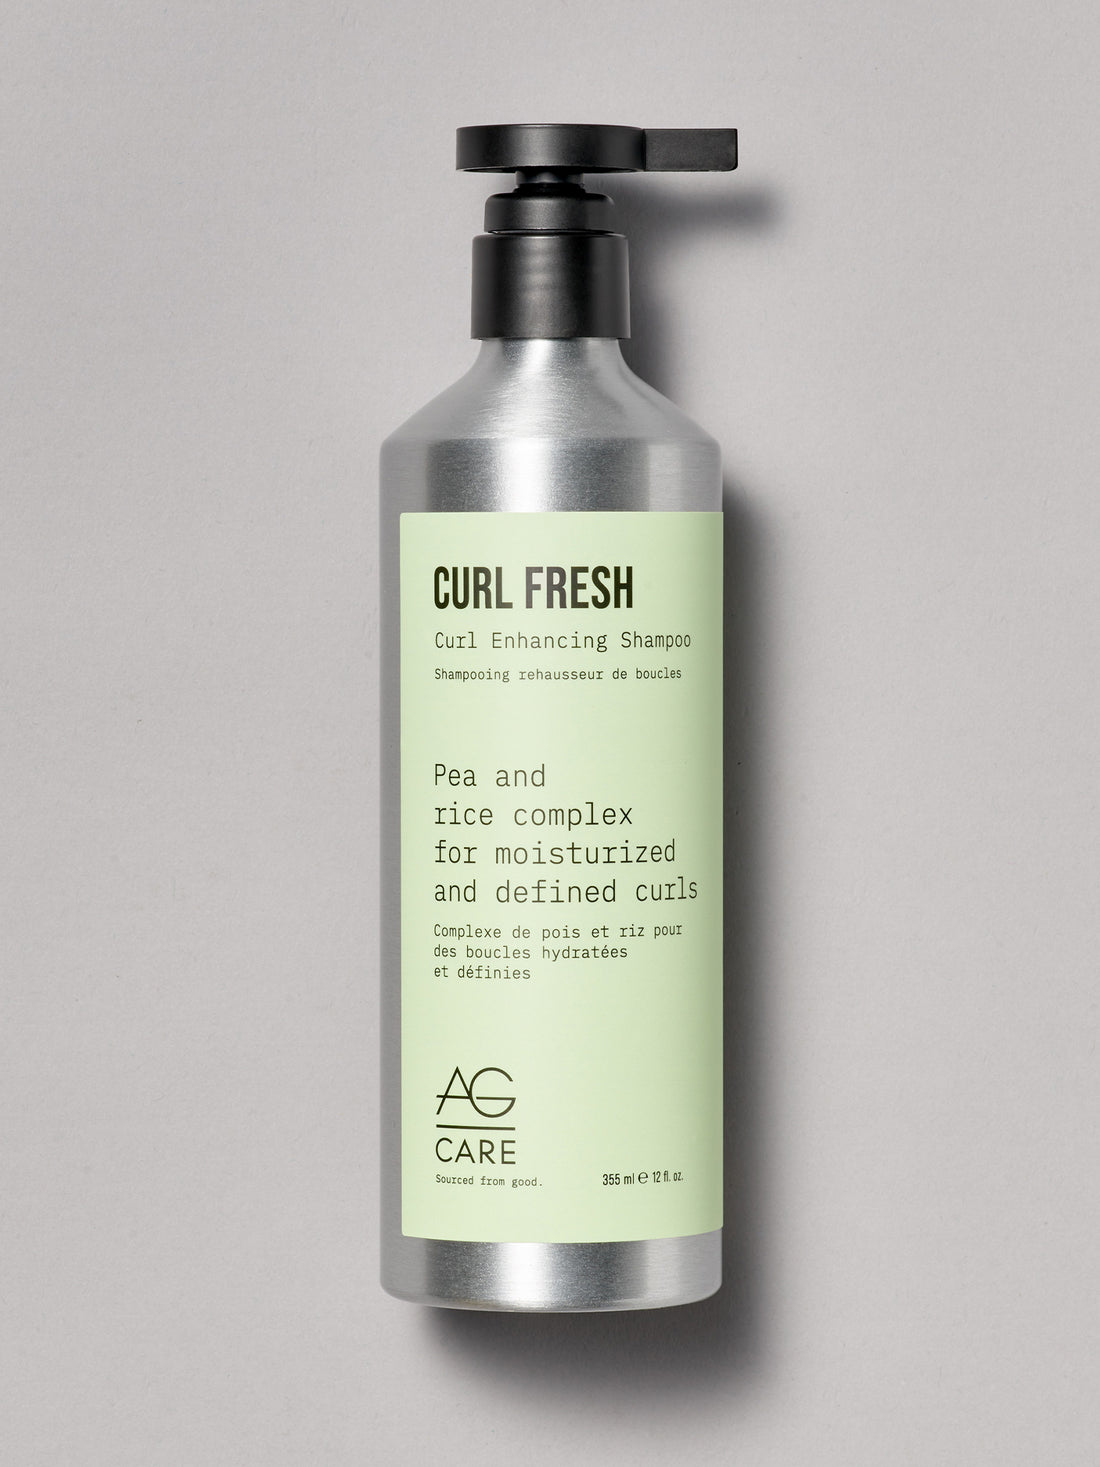 AG CURL Curl Enhancing Sulfate-Free Shampoo Care